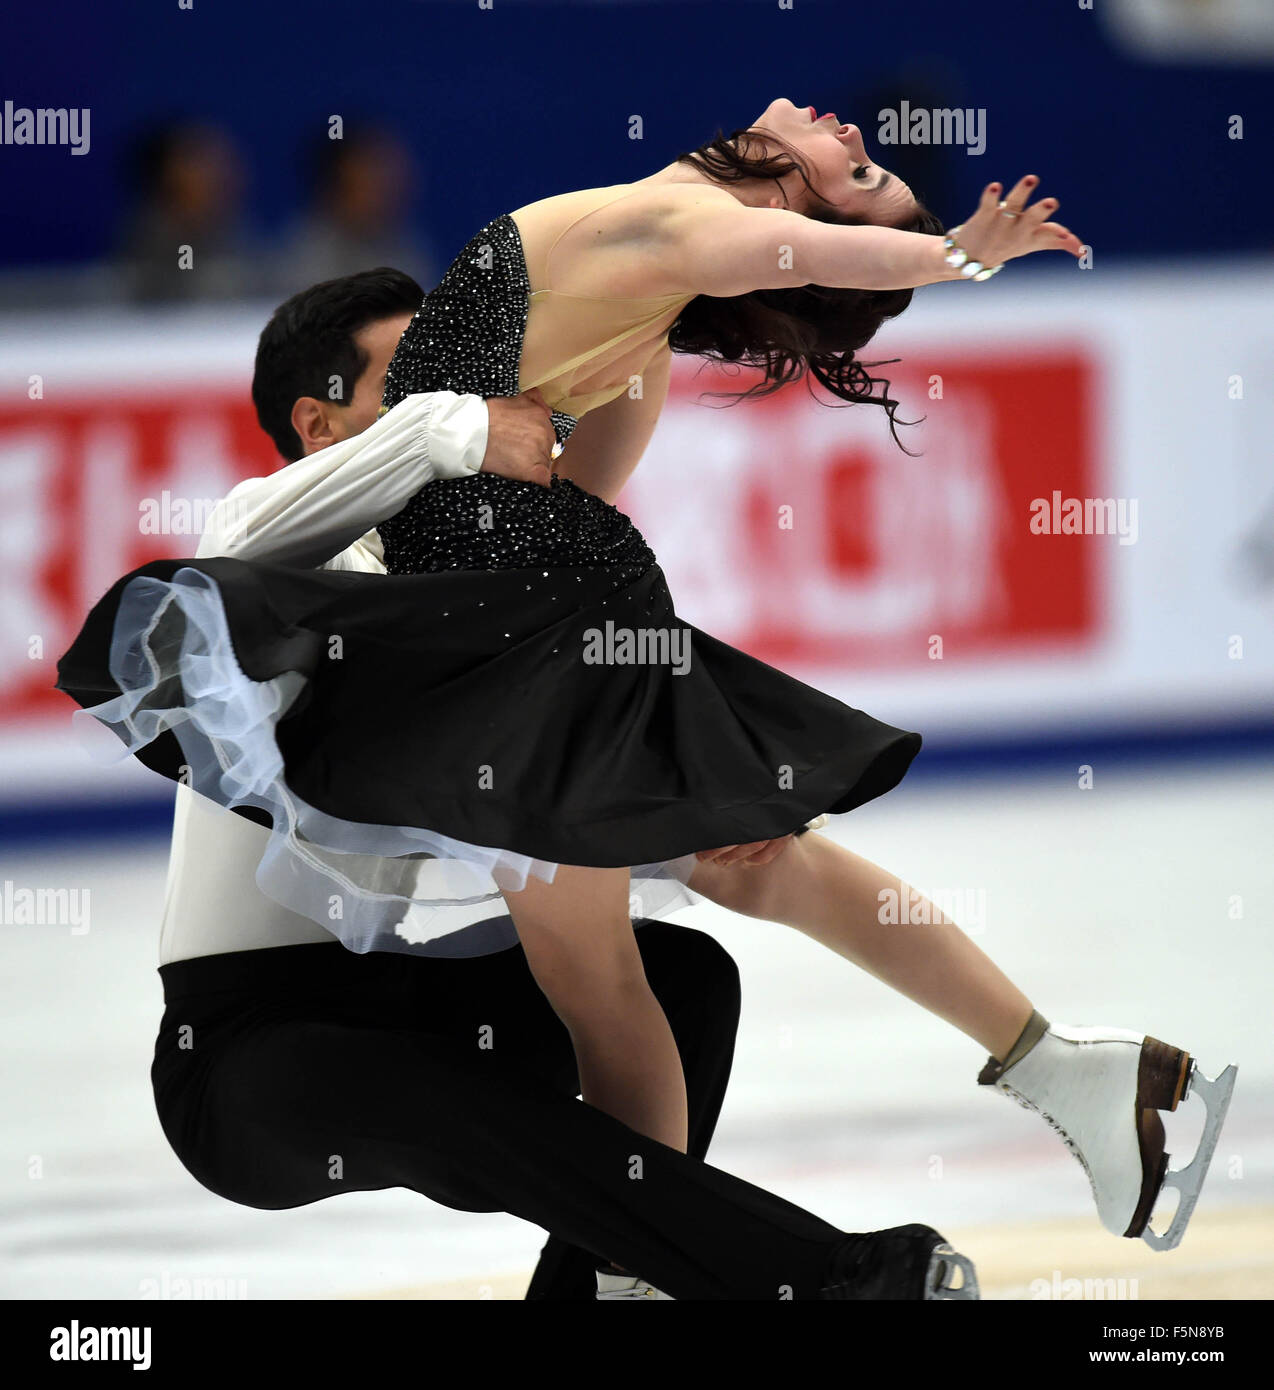 Anna cappellini luca lanotte italy High Resolution Stock Photography and  Images - Alamy